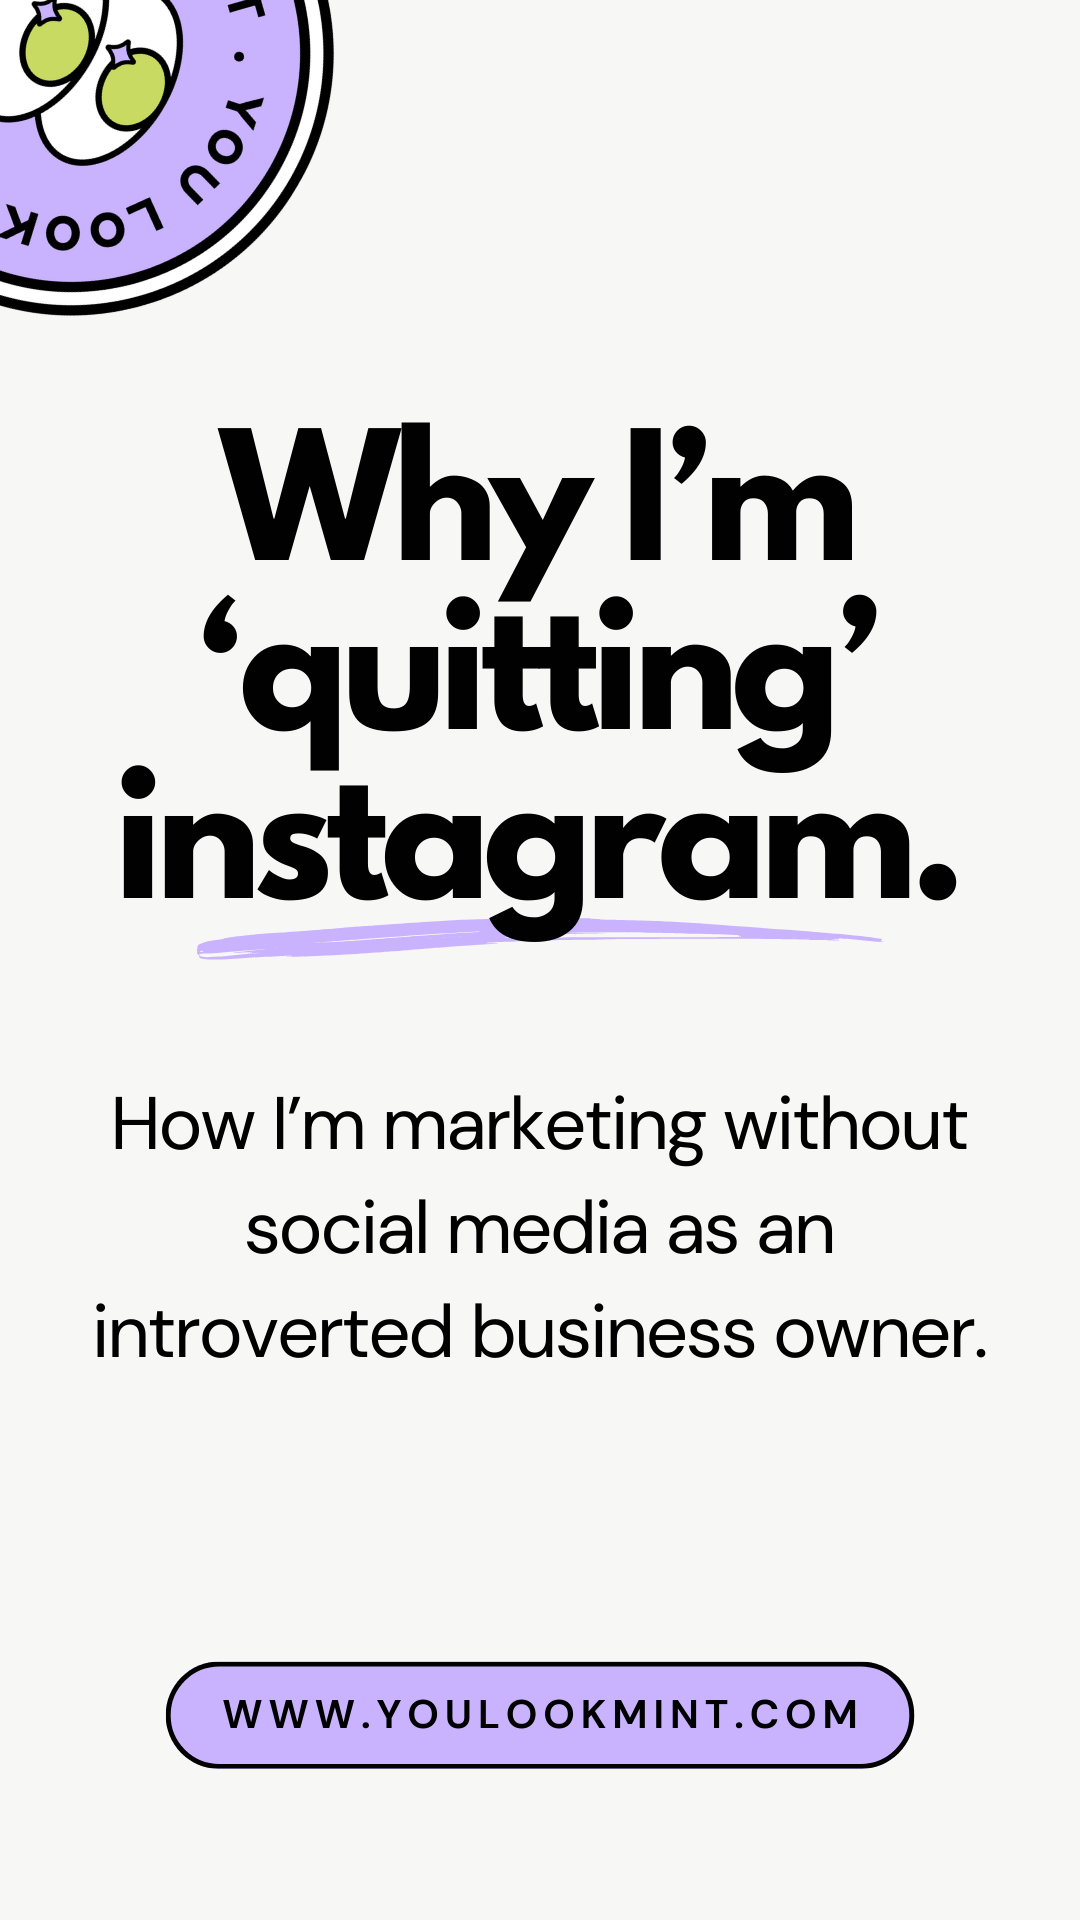 Quitting Instagram for my business